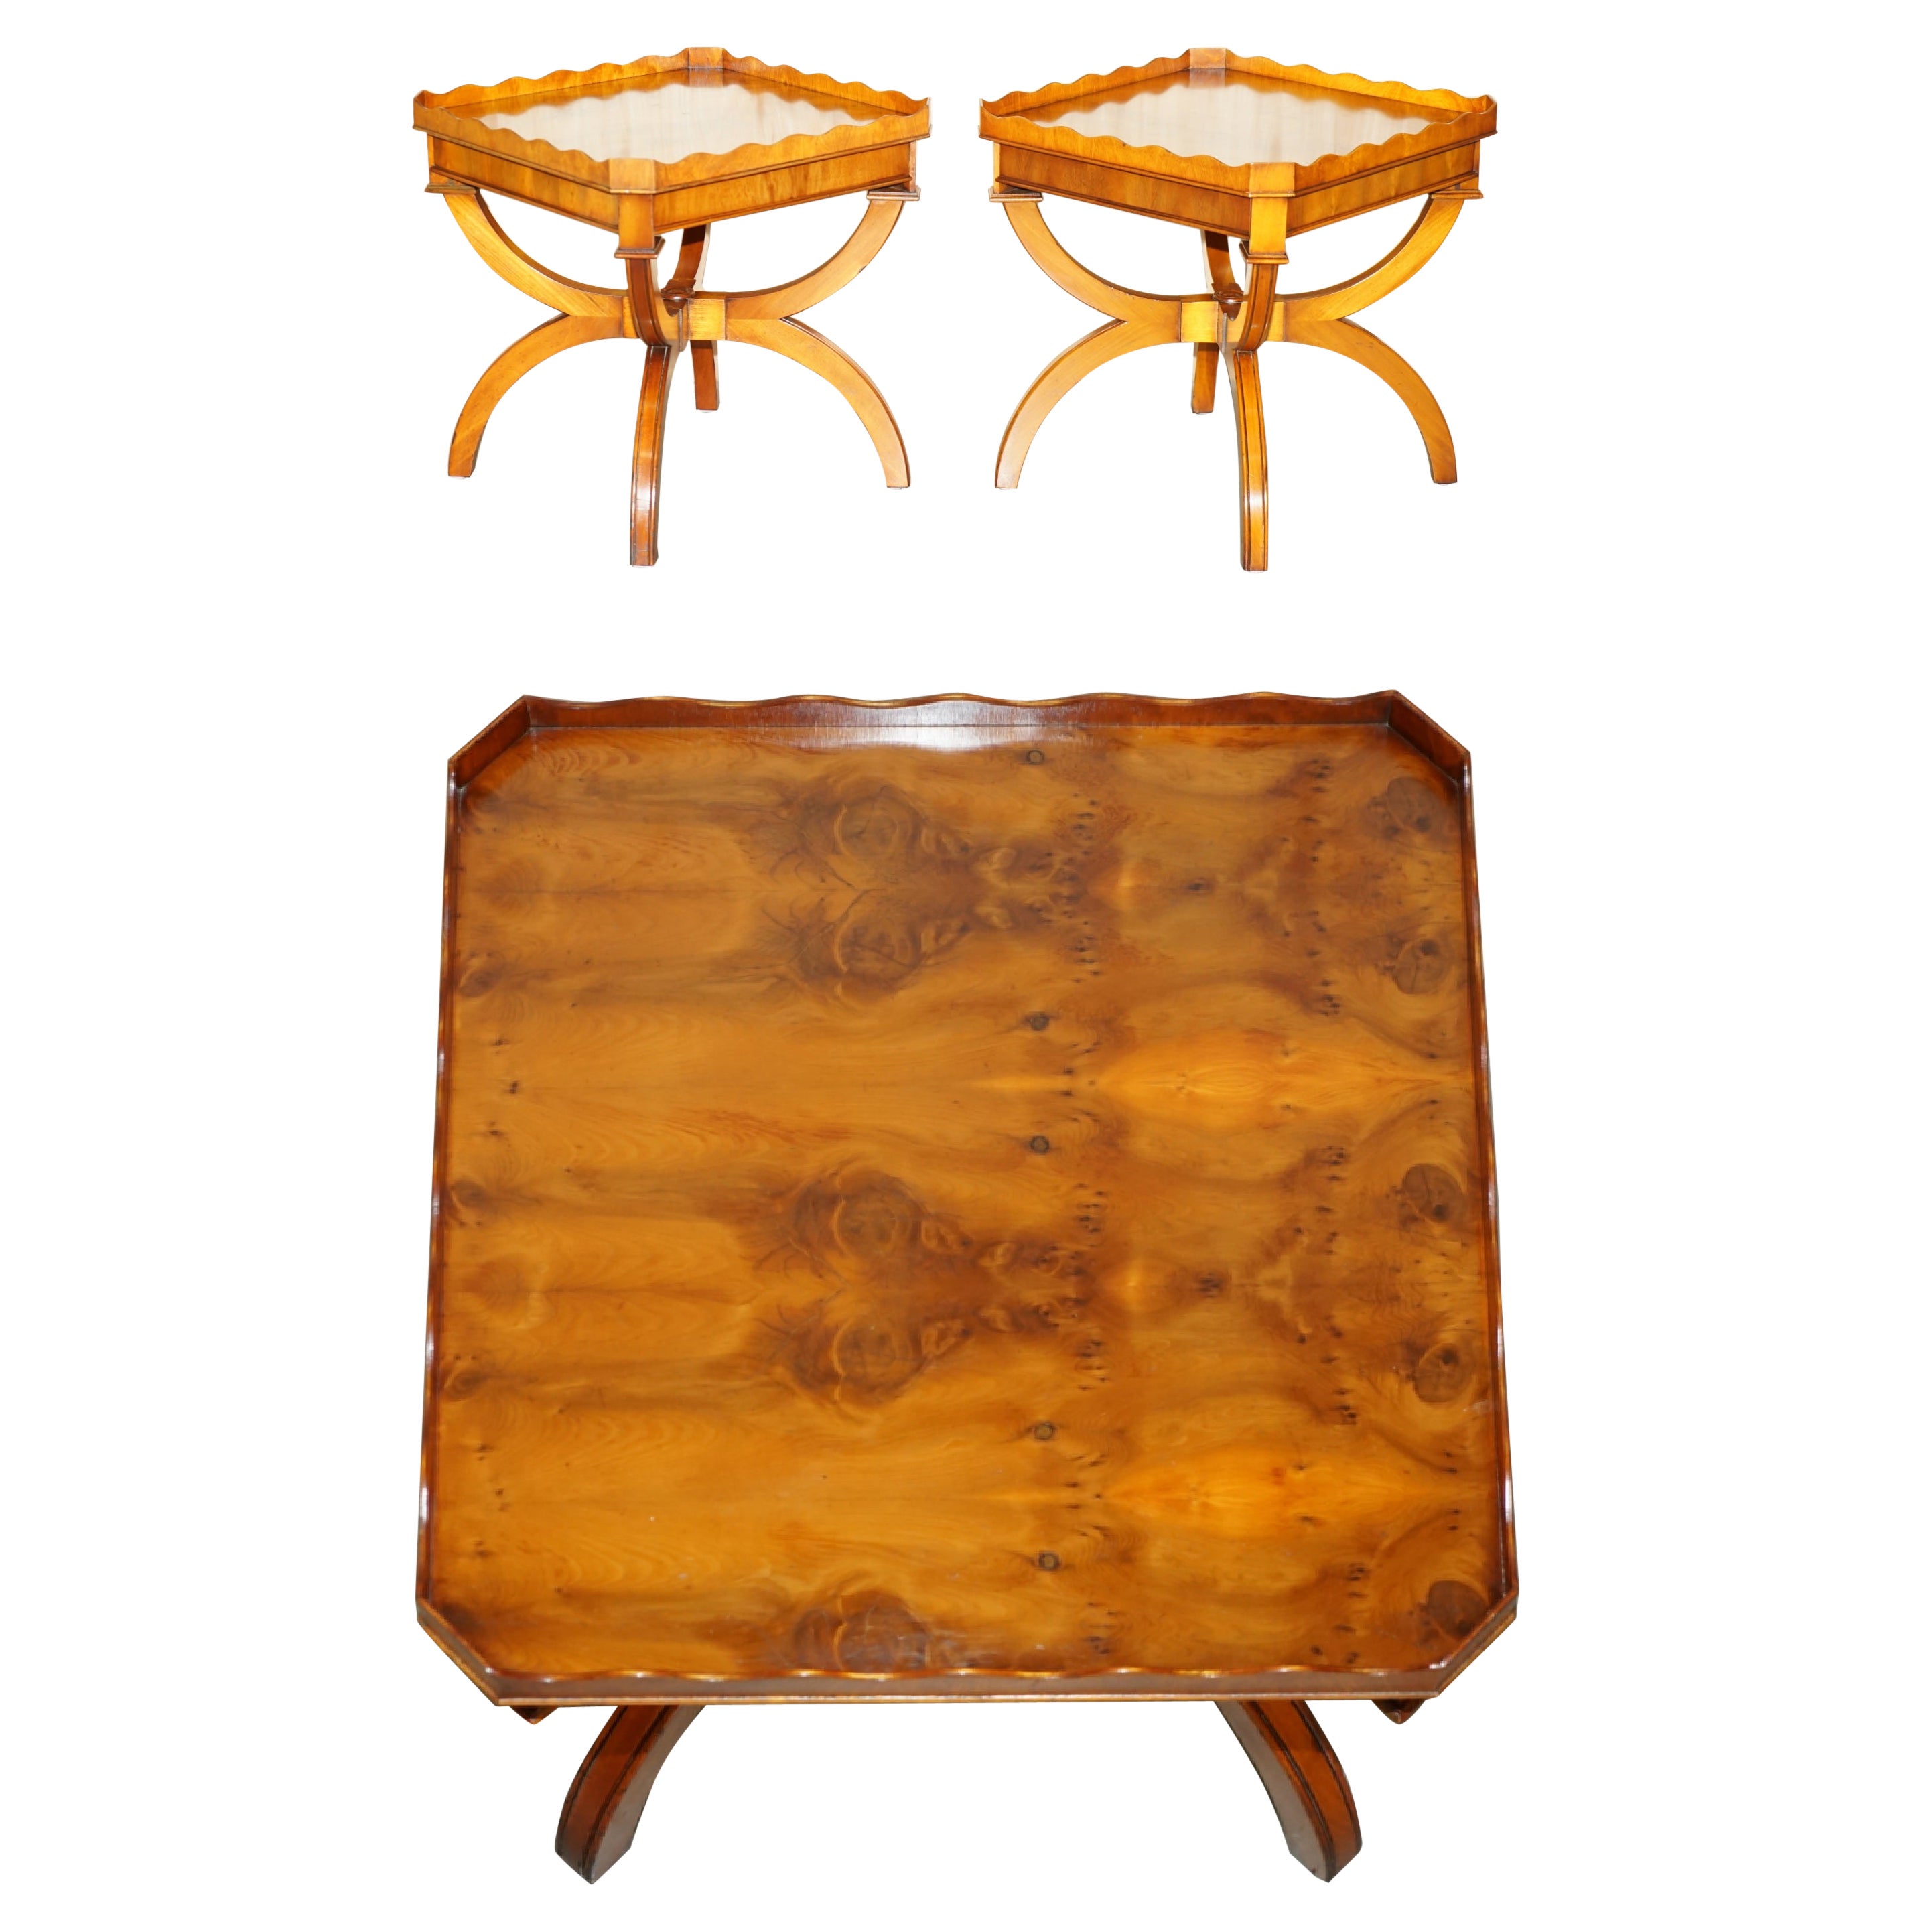 PAIR OF BEVAN FUNNELL ENGLAND BURR YEW SIDE TABLES EACH WITH A SIGNLE DRAWEr For Sale